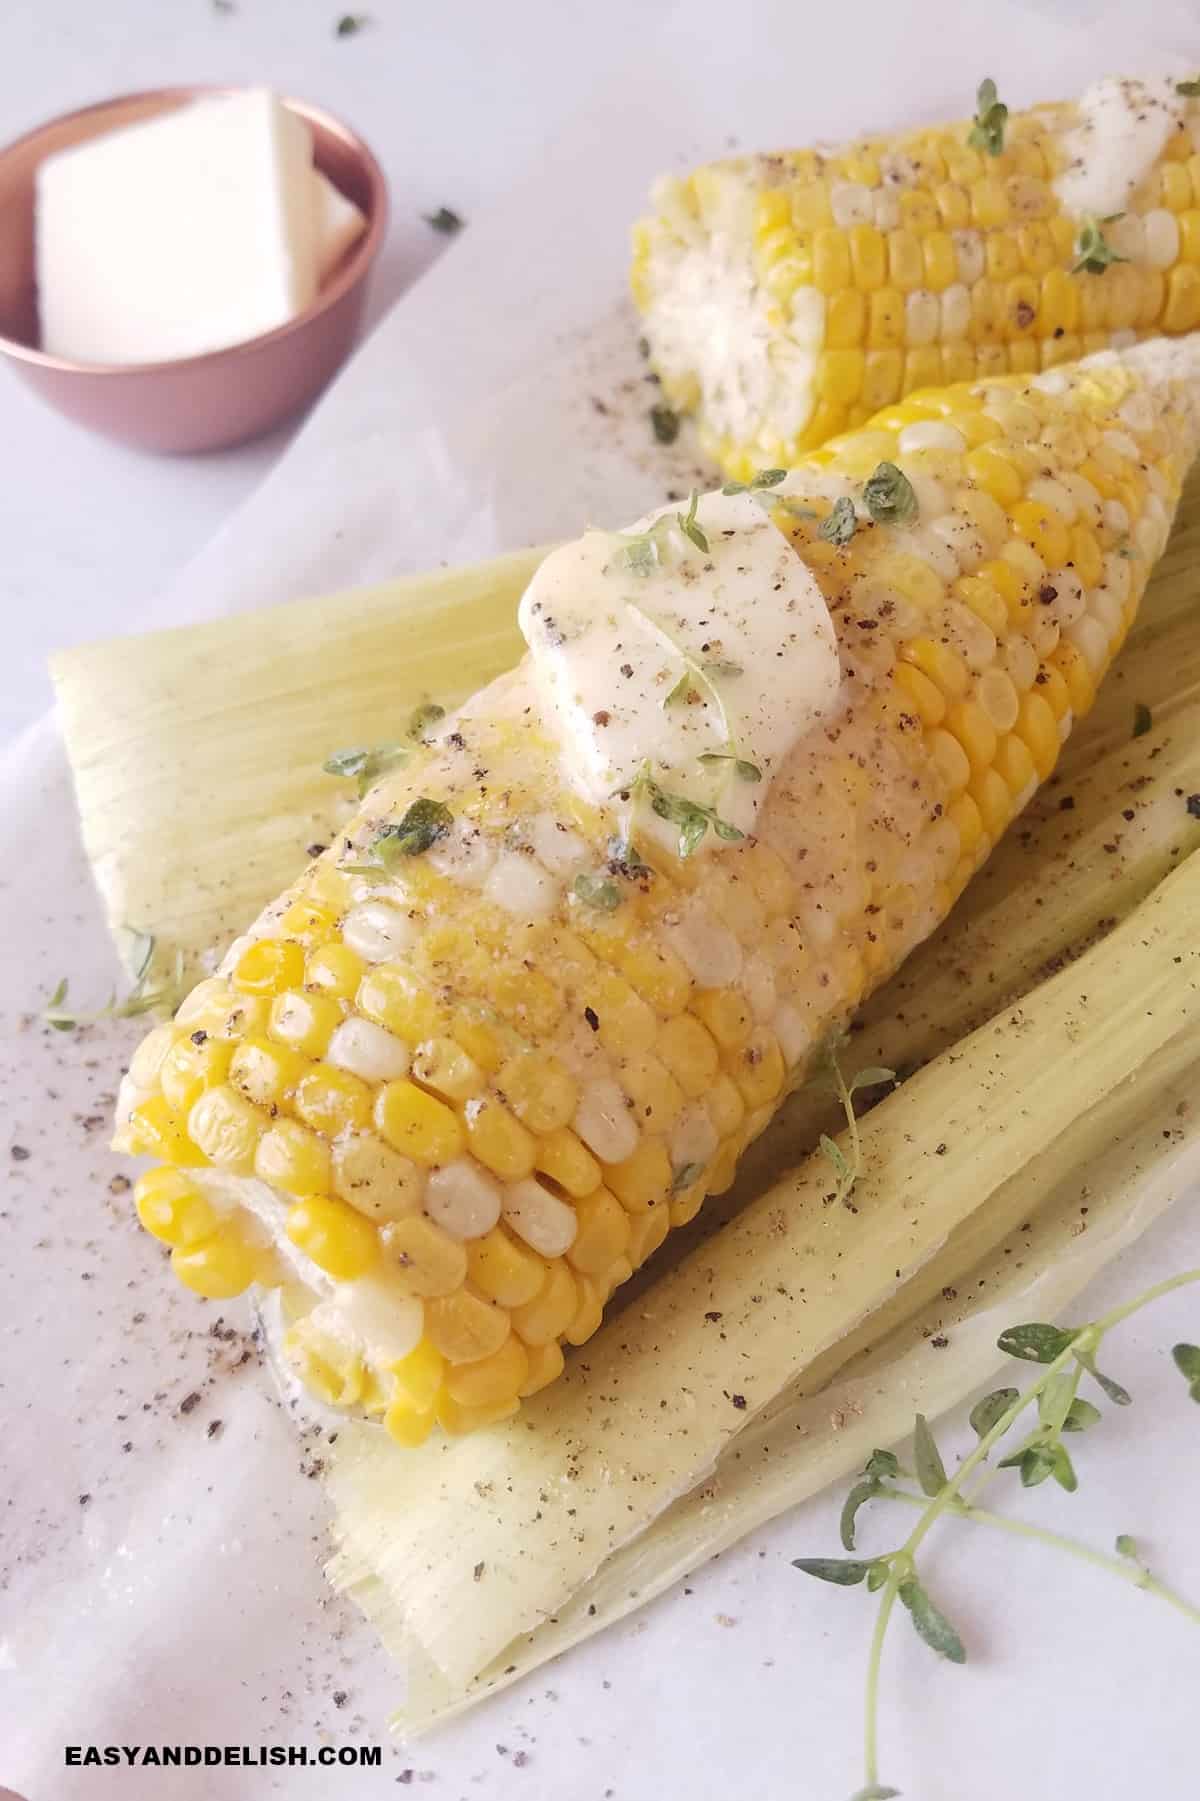 shucked corn on the cob over husk with some butter pat, seasonings,a nd herbs on top of the cob.